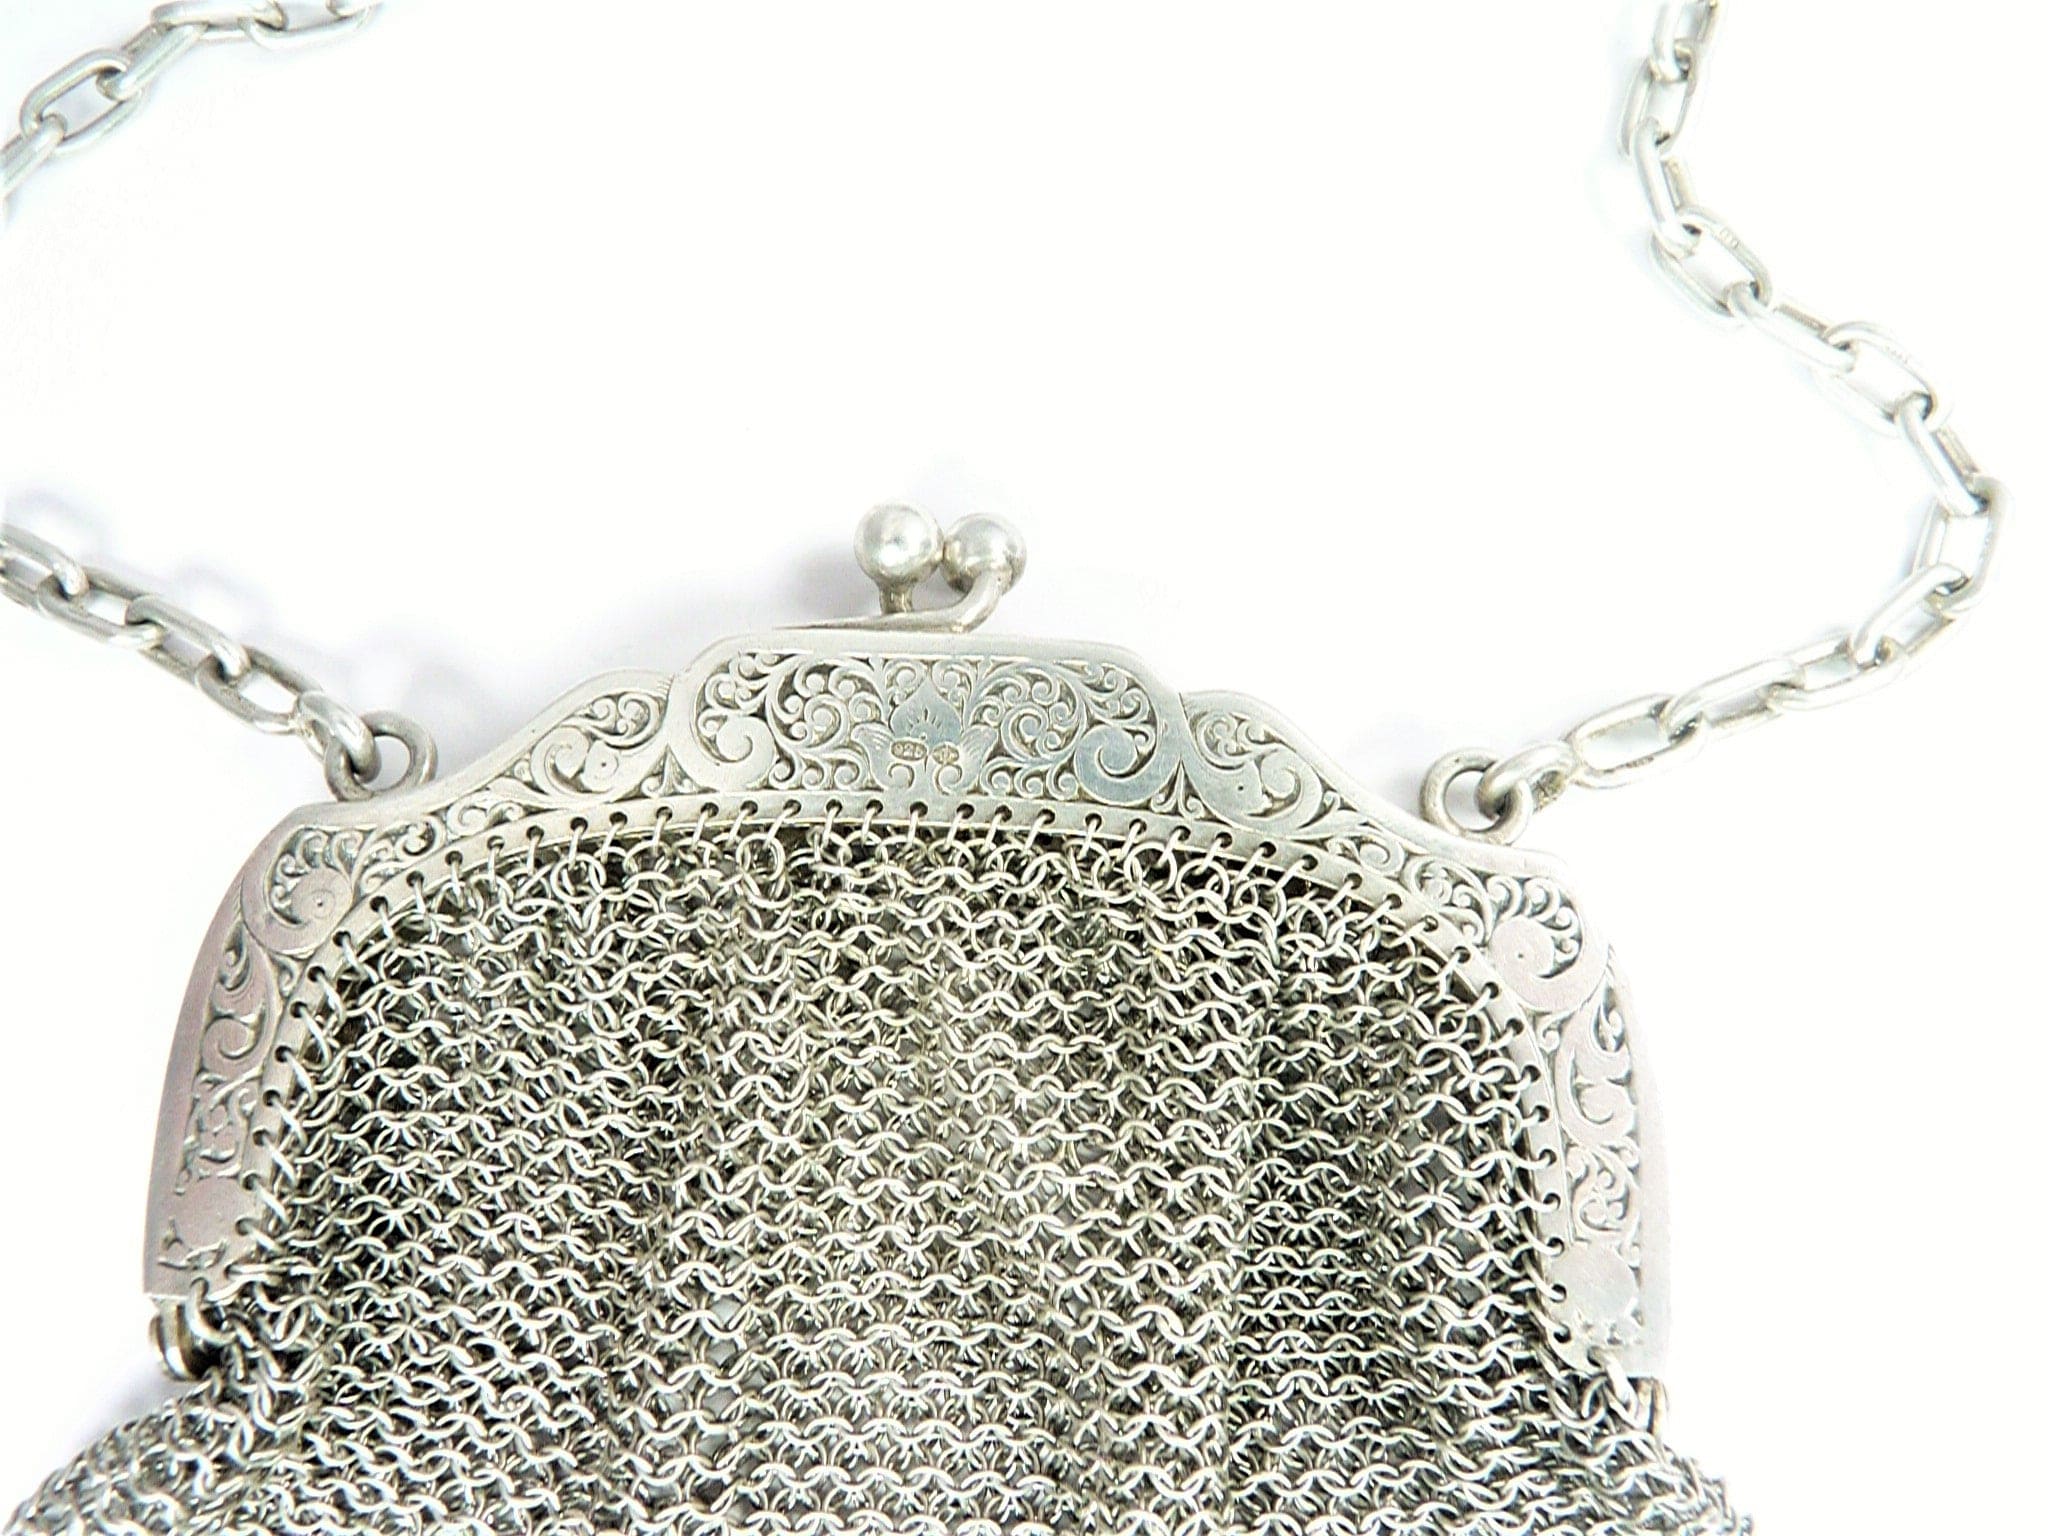 Vintage French Sterling Silver Purse Engraved Stock Image - Image of  diamond, color: 64299803